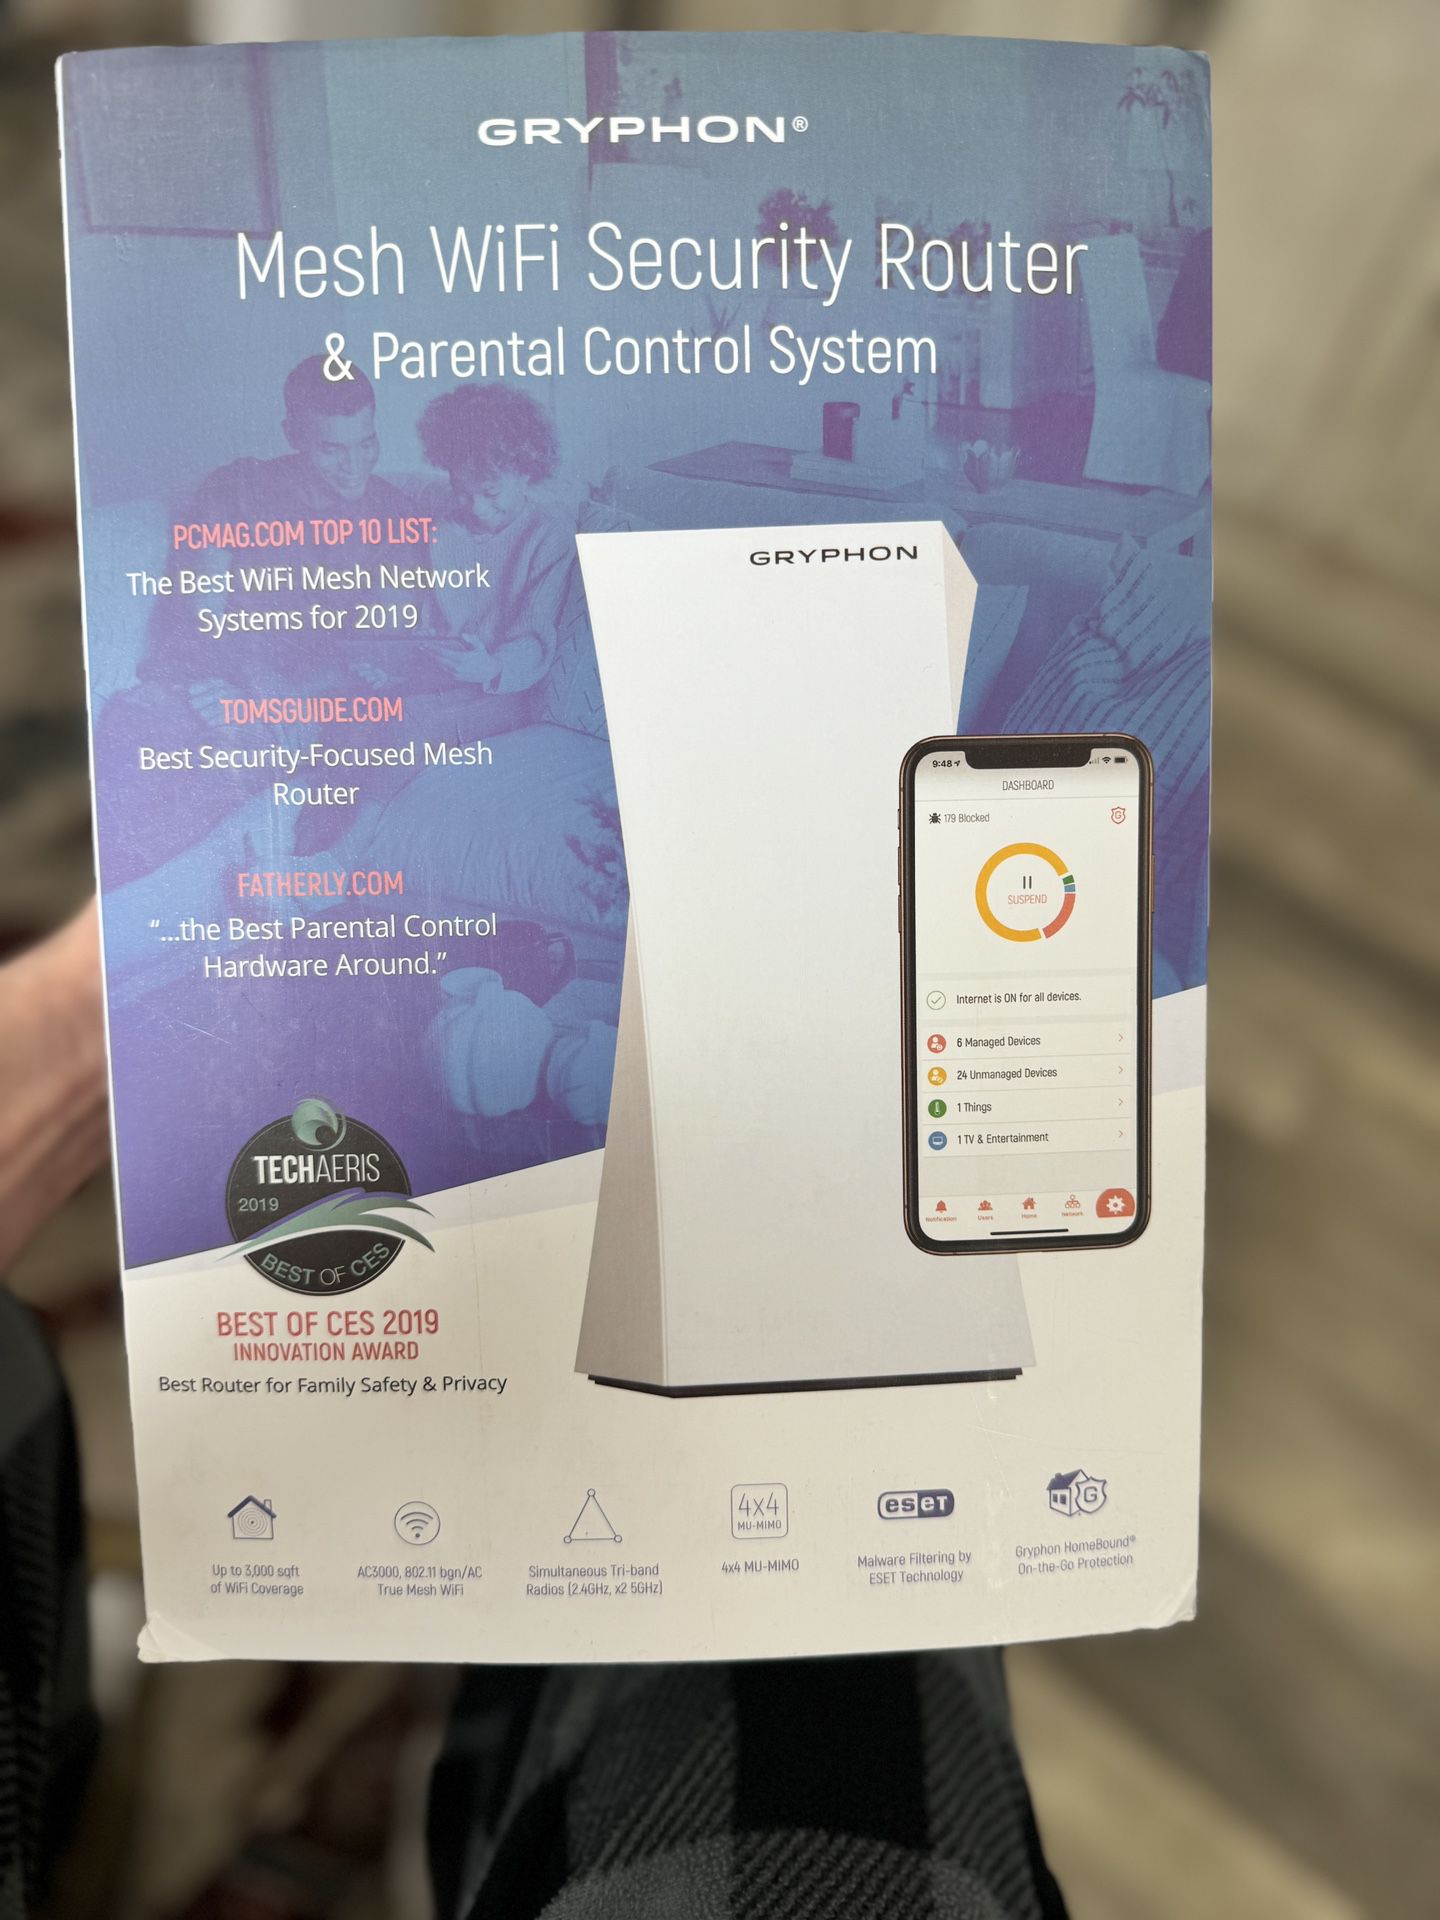 Gryphon Mesh WiFi Security Router